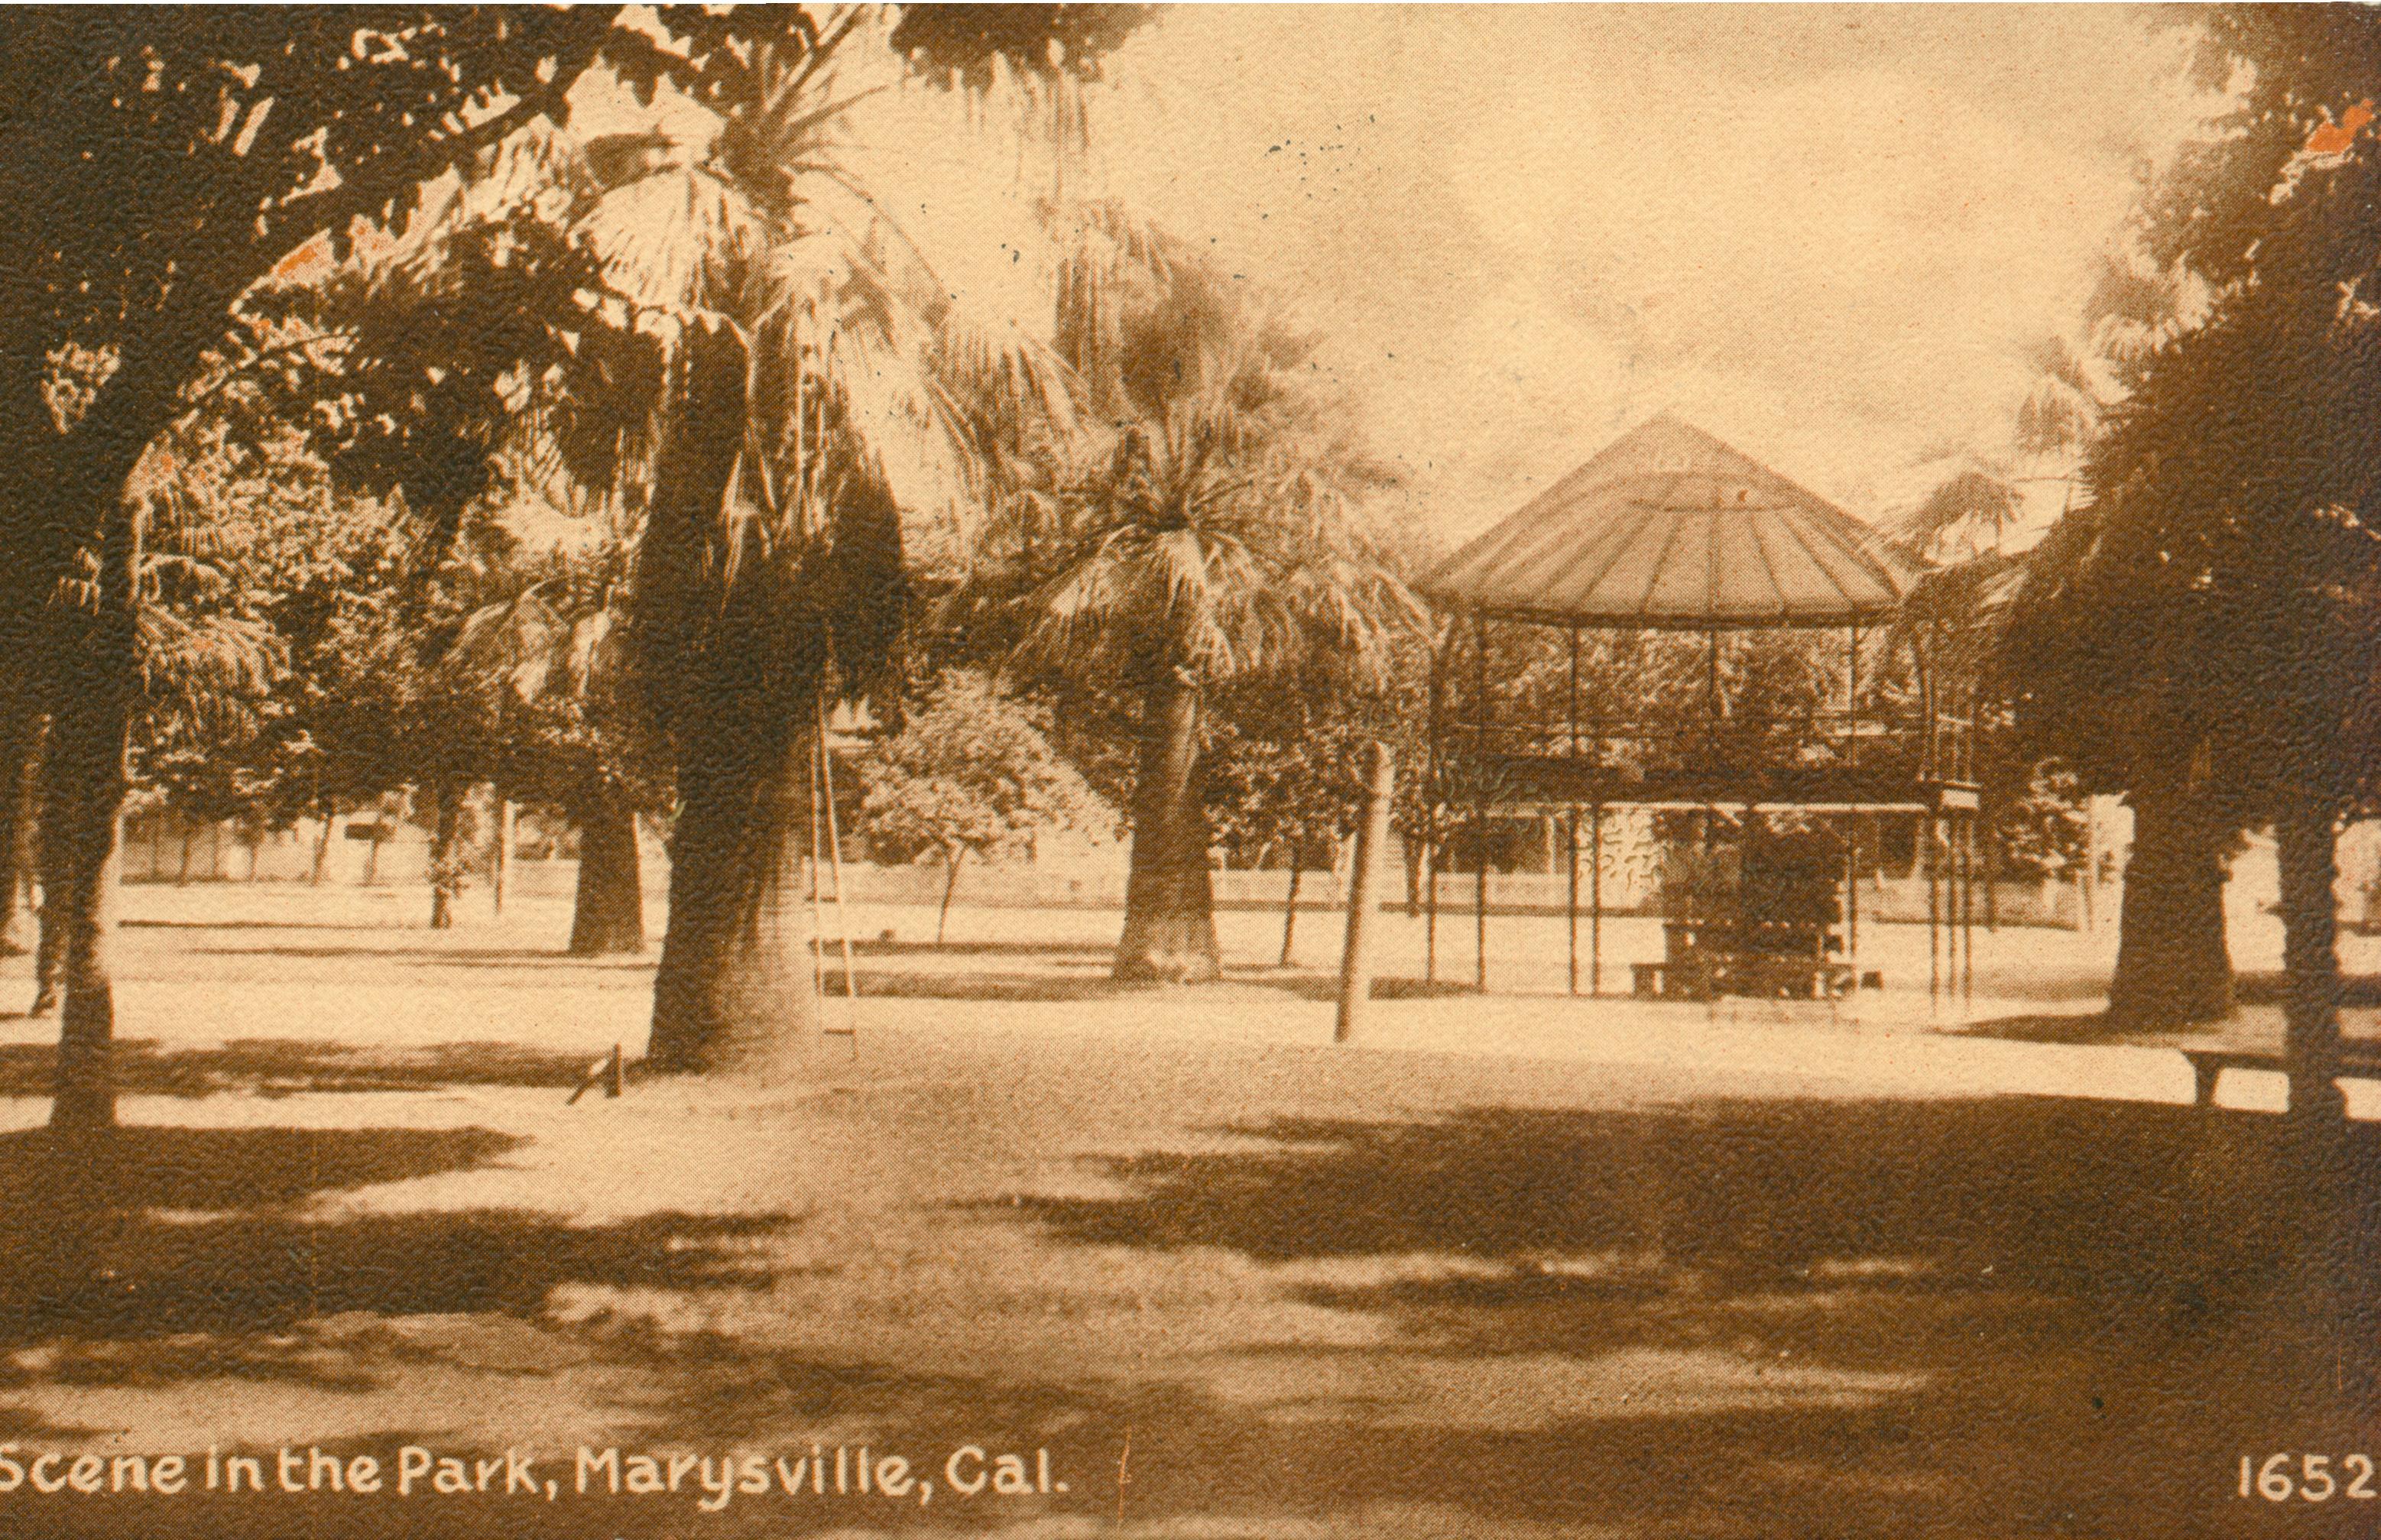 Shows a gazebo and several trees in a park